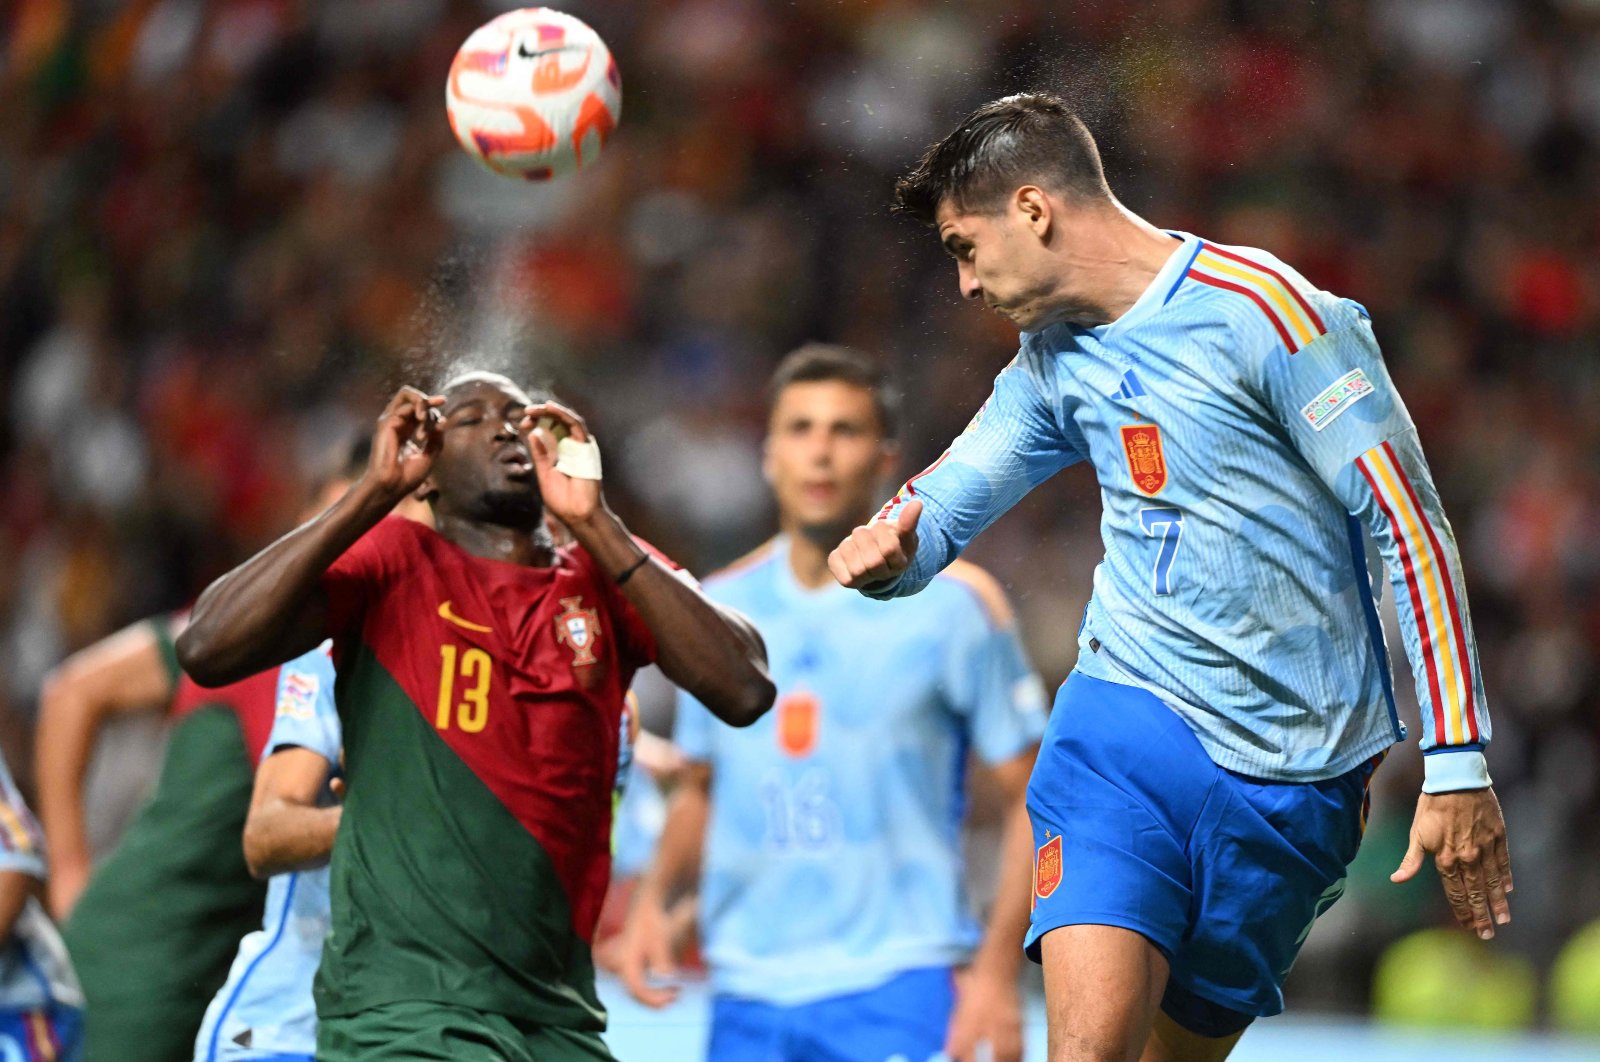 Danilo Pereira (L) vies with Alvaro Morata during the UEFA Nations League match between Portugal and Spain, at the Municipal Stadium in Braga, Portugal, Sept. 27, 2022. (AFP Photo)